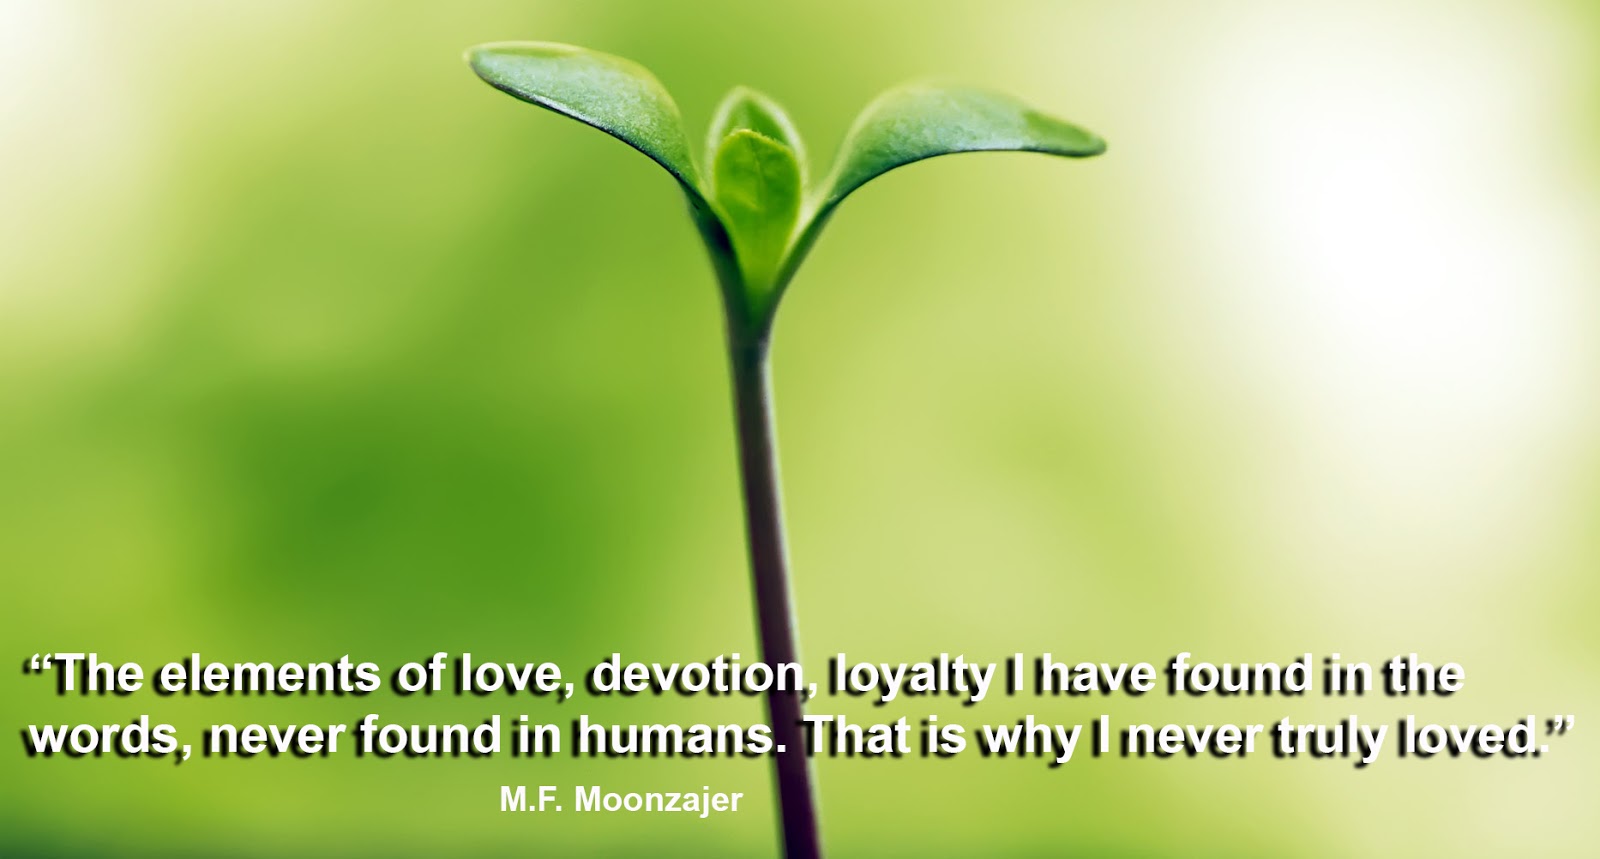 Love Quotes Devotion loyalty Best quotes